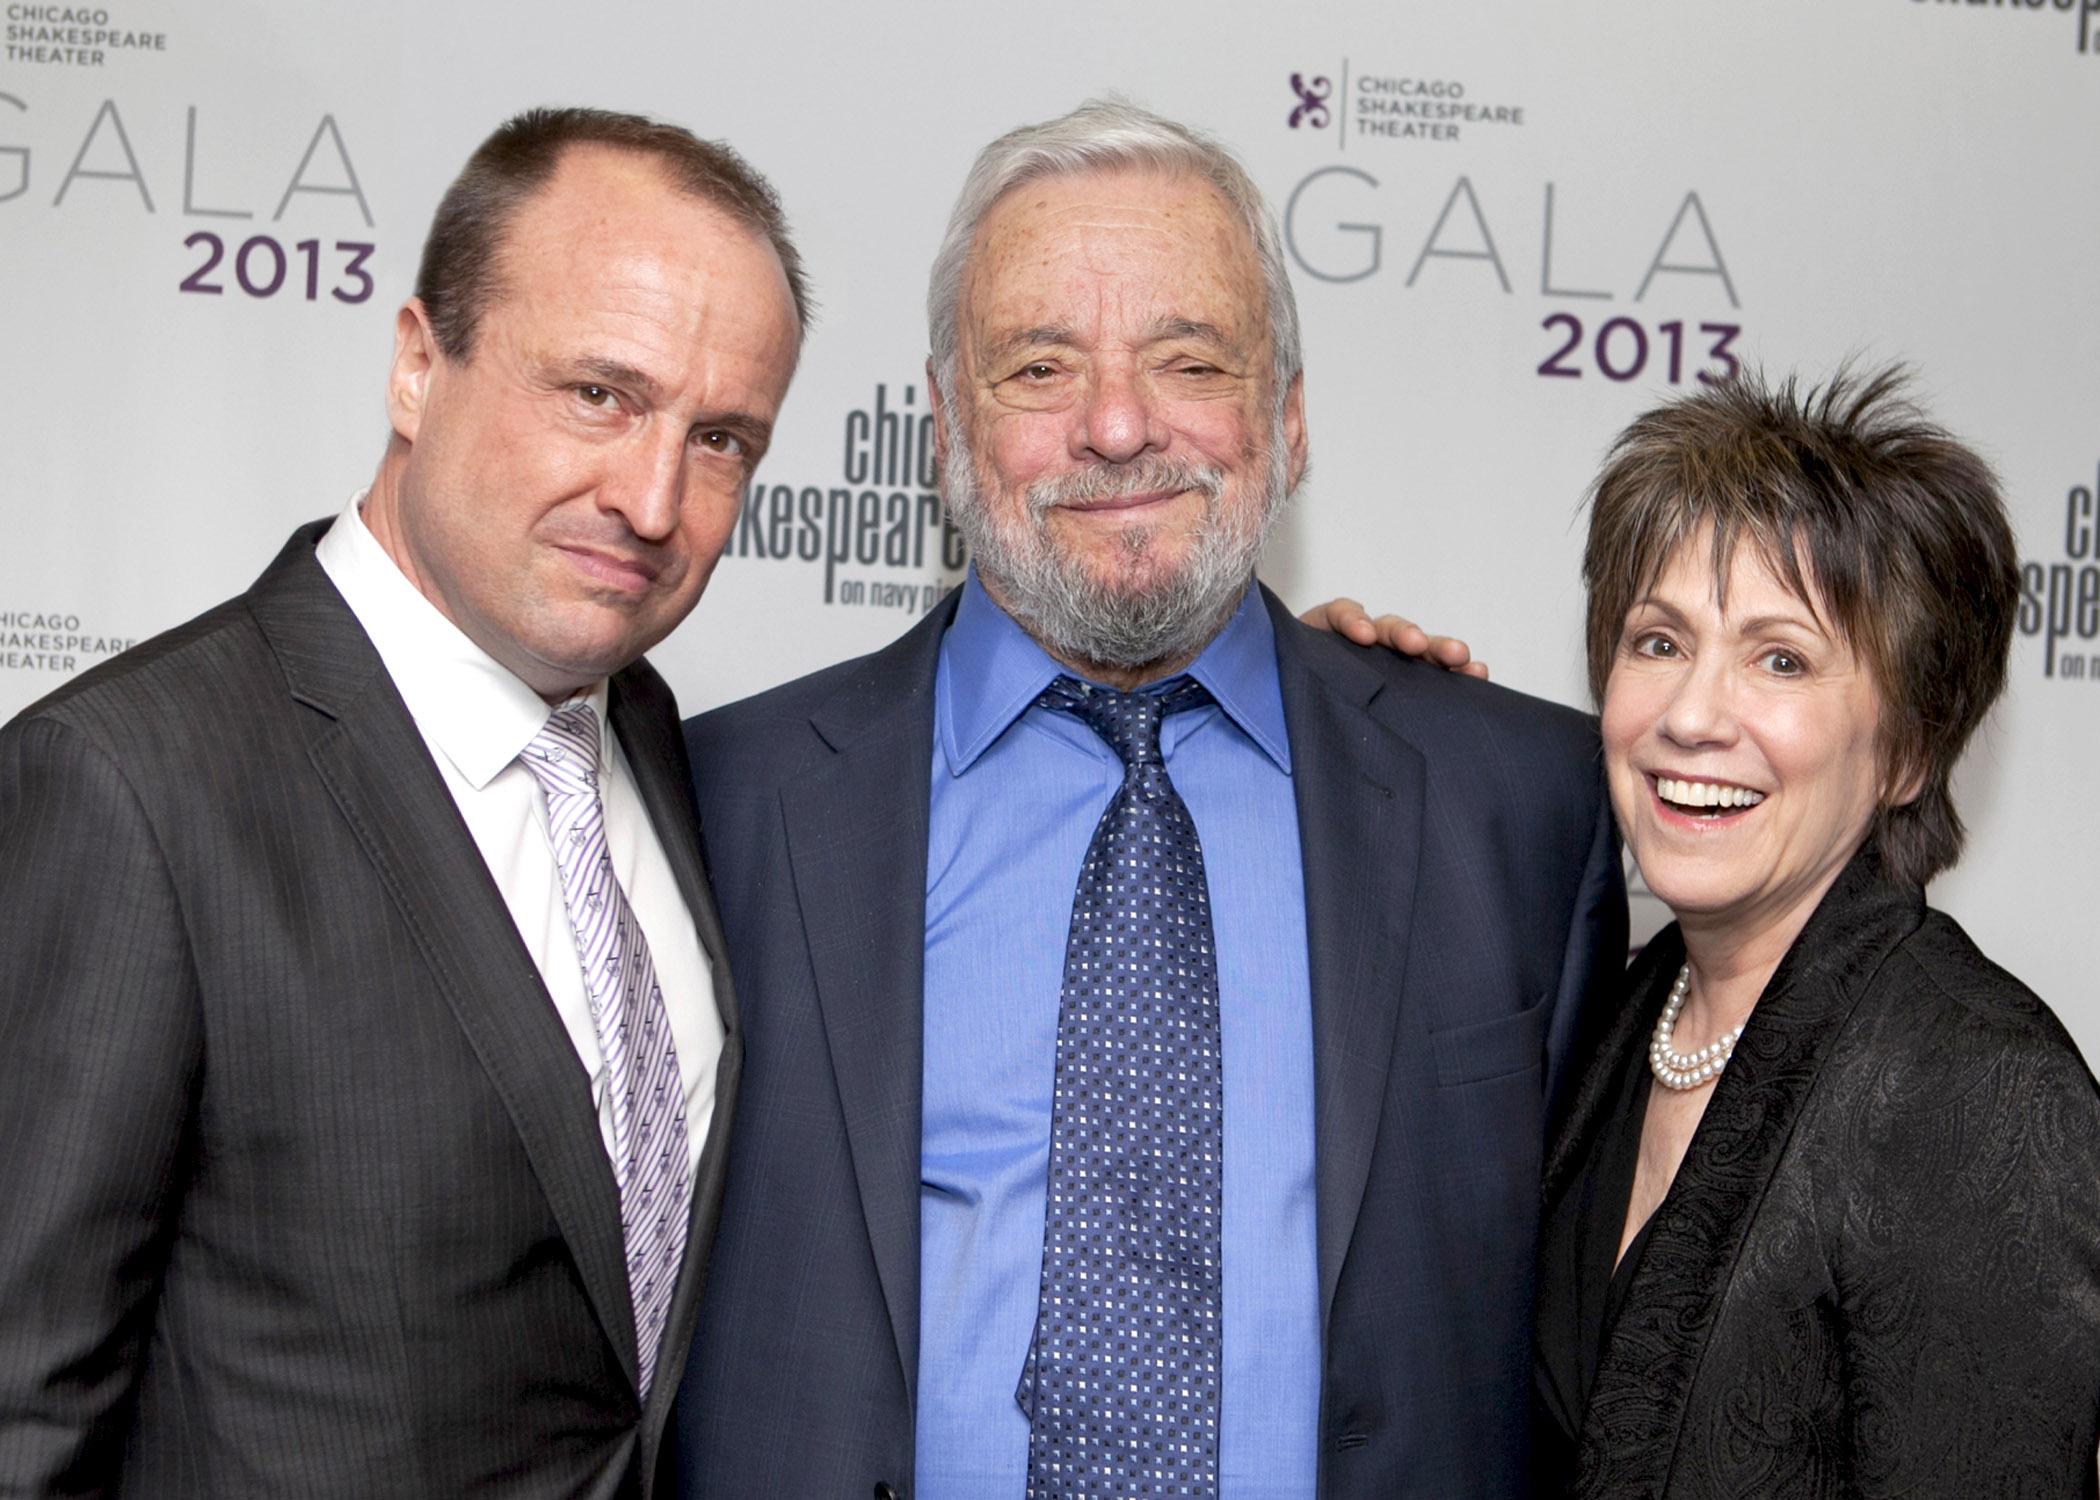 Gary Griffin (left), Stephen Sondheim and Chicago Shakespeare Theater Founder Barbara Gaines pose for a picture. (Courtesy of Michael Litchfield)